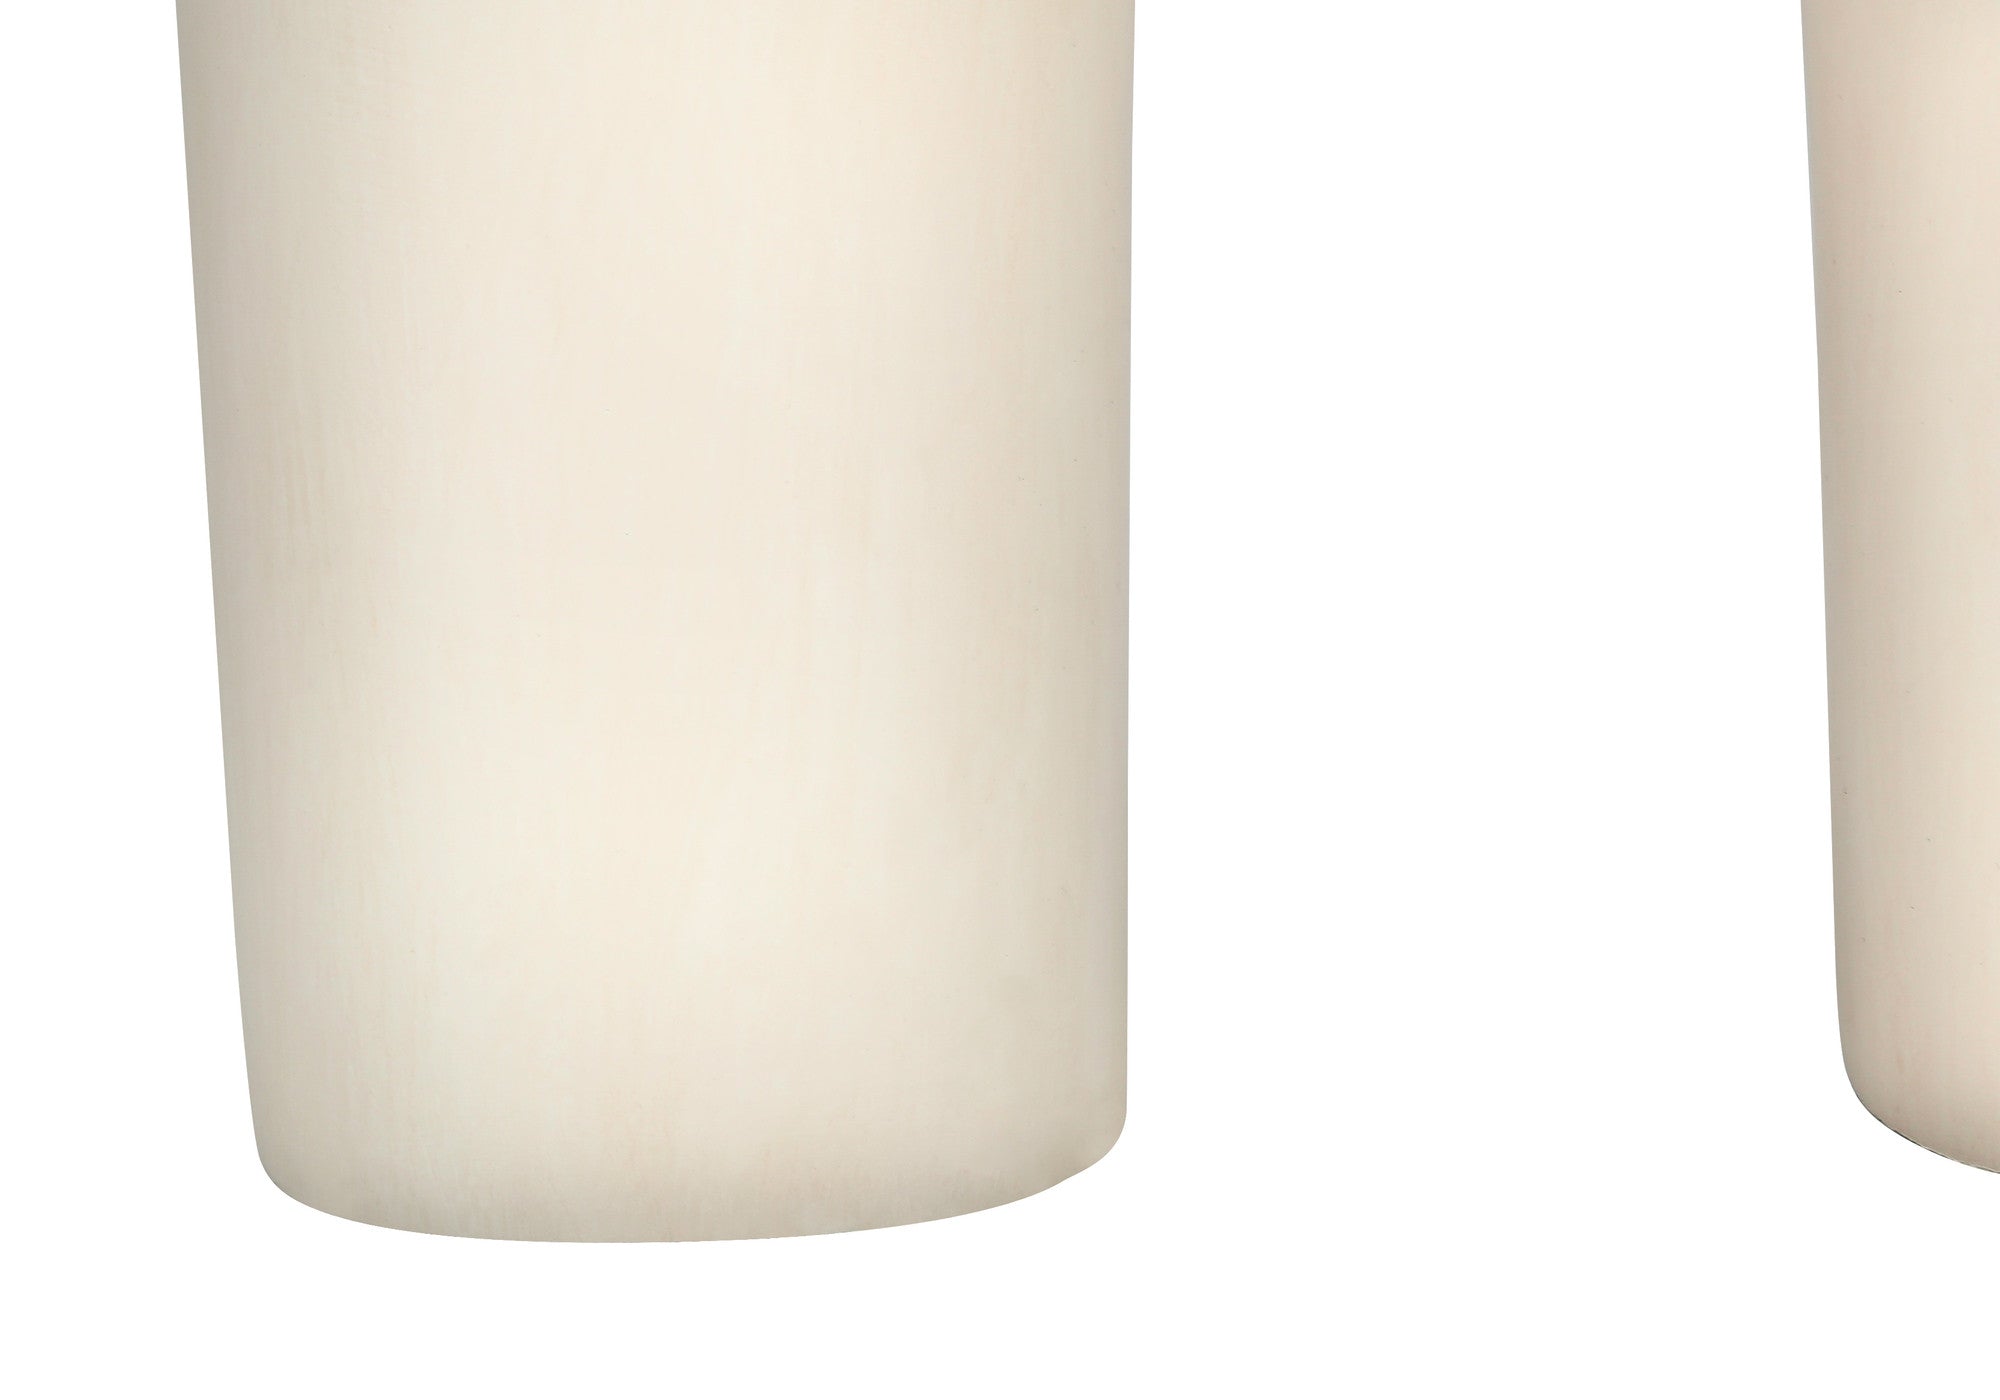 25" Cream Geometric Table Lamp With Beige Empire Shade